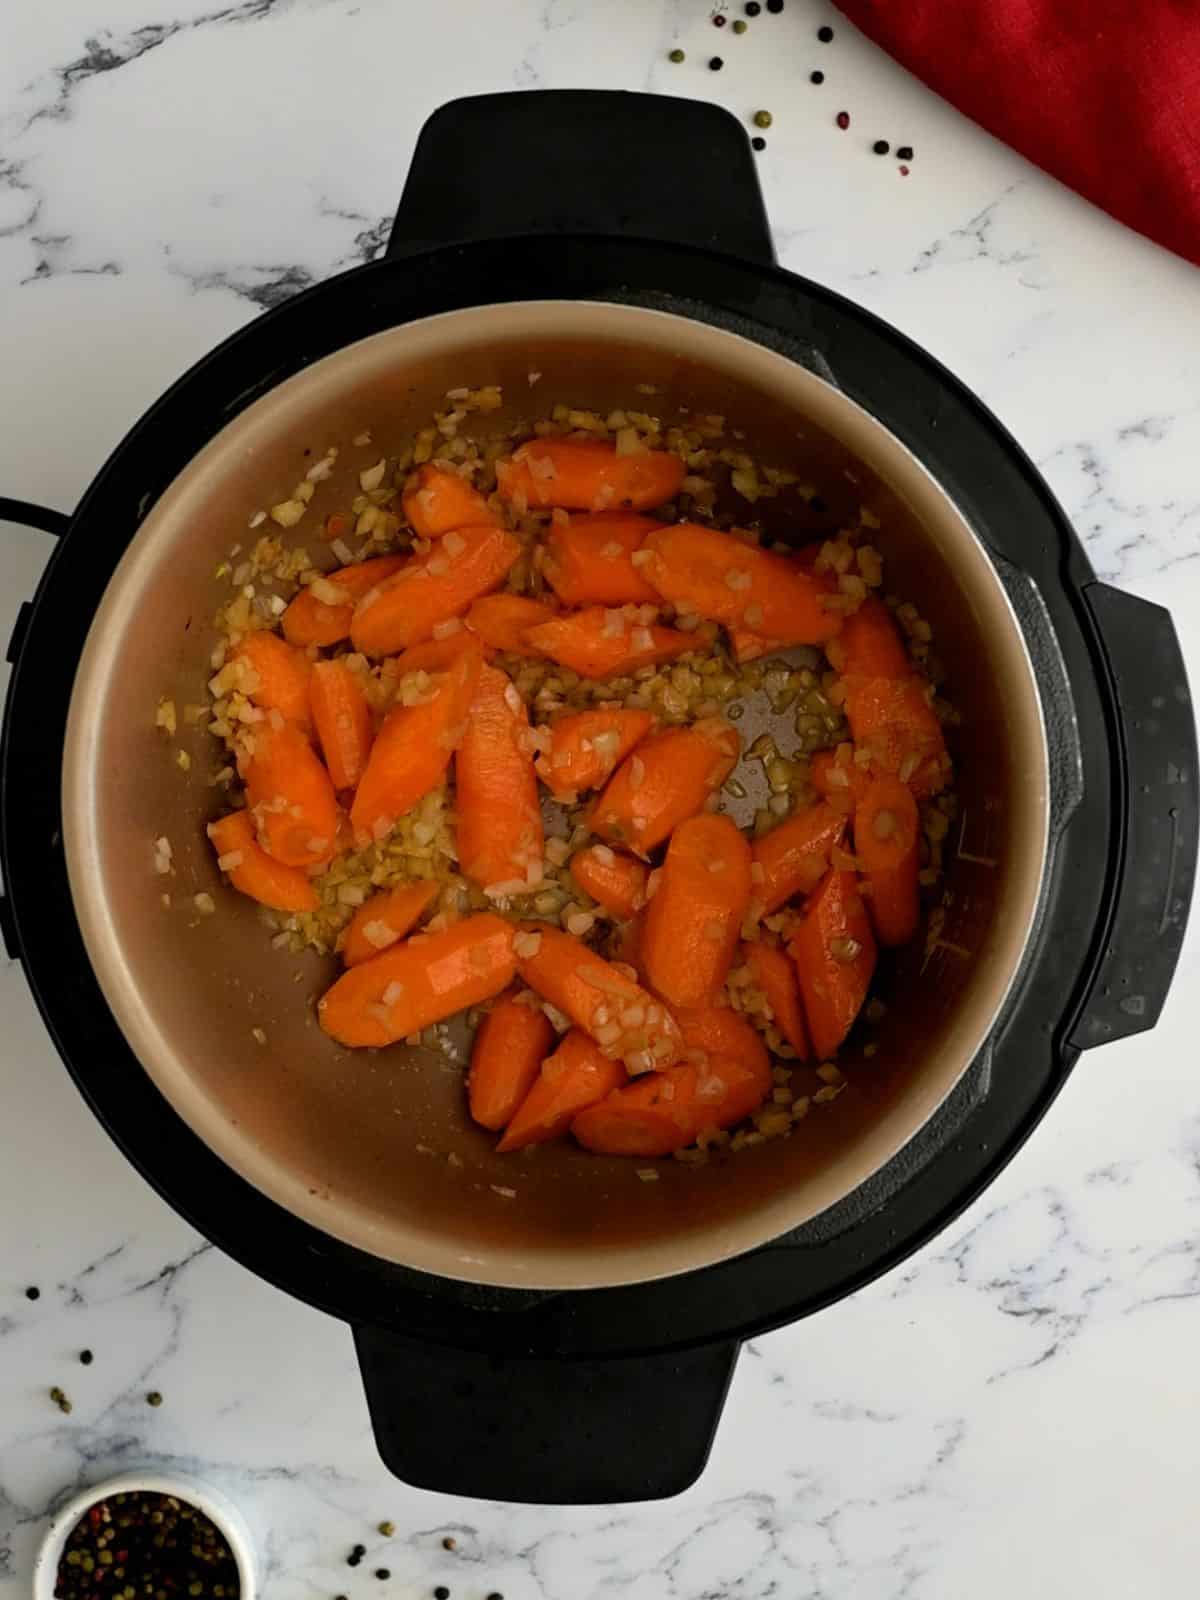 Carrots and onions sauteed in inner pot of Instant Pot.